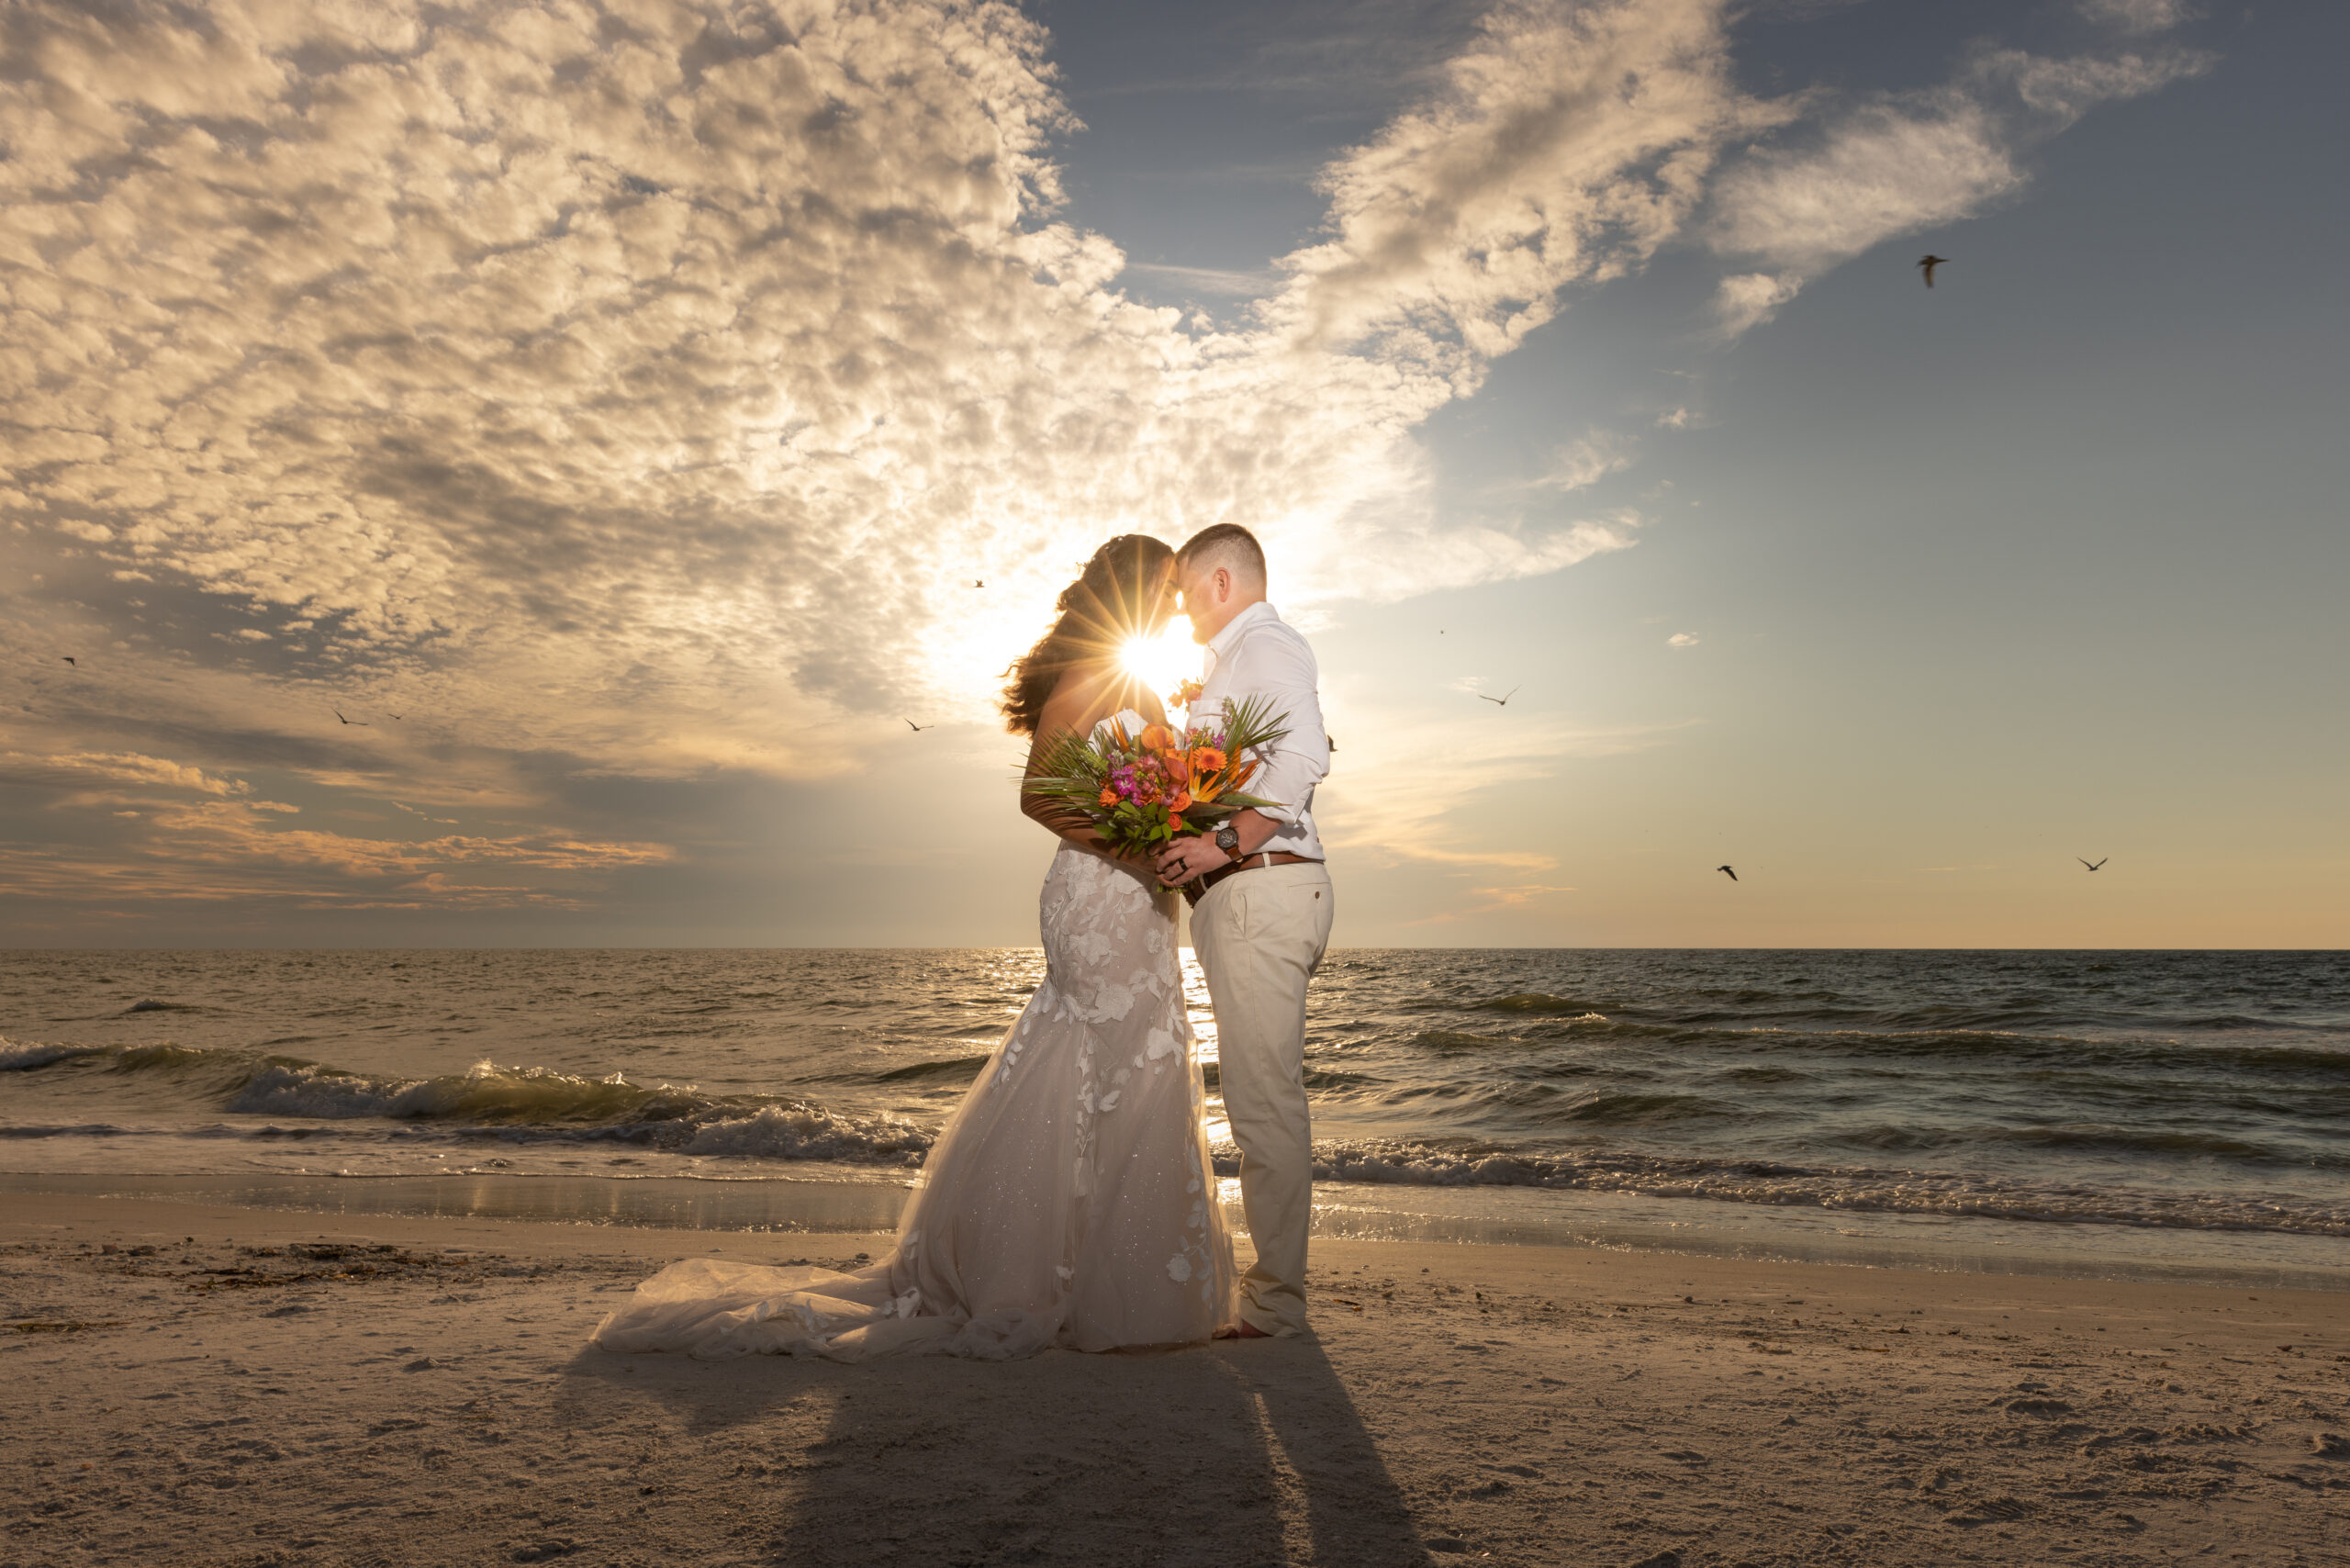 married couple on the beach at sunset - tampa wedding photography